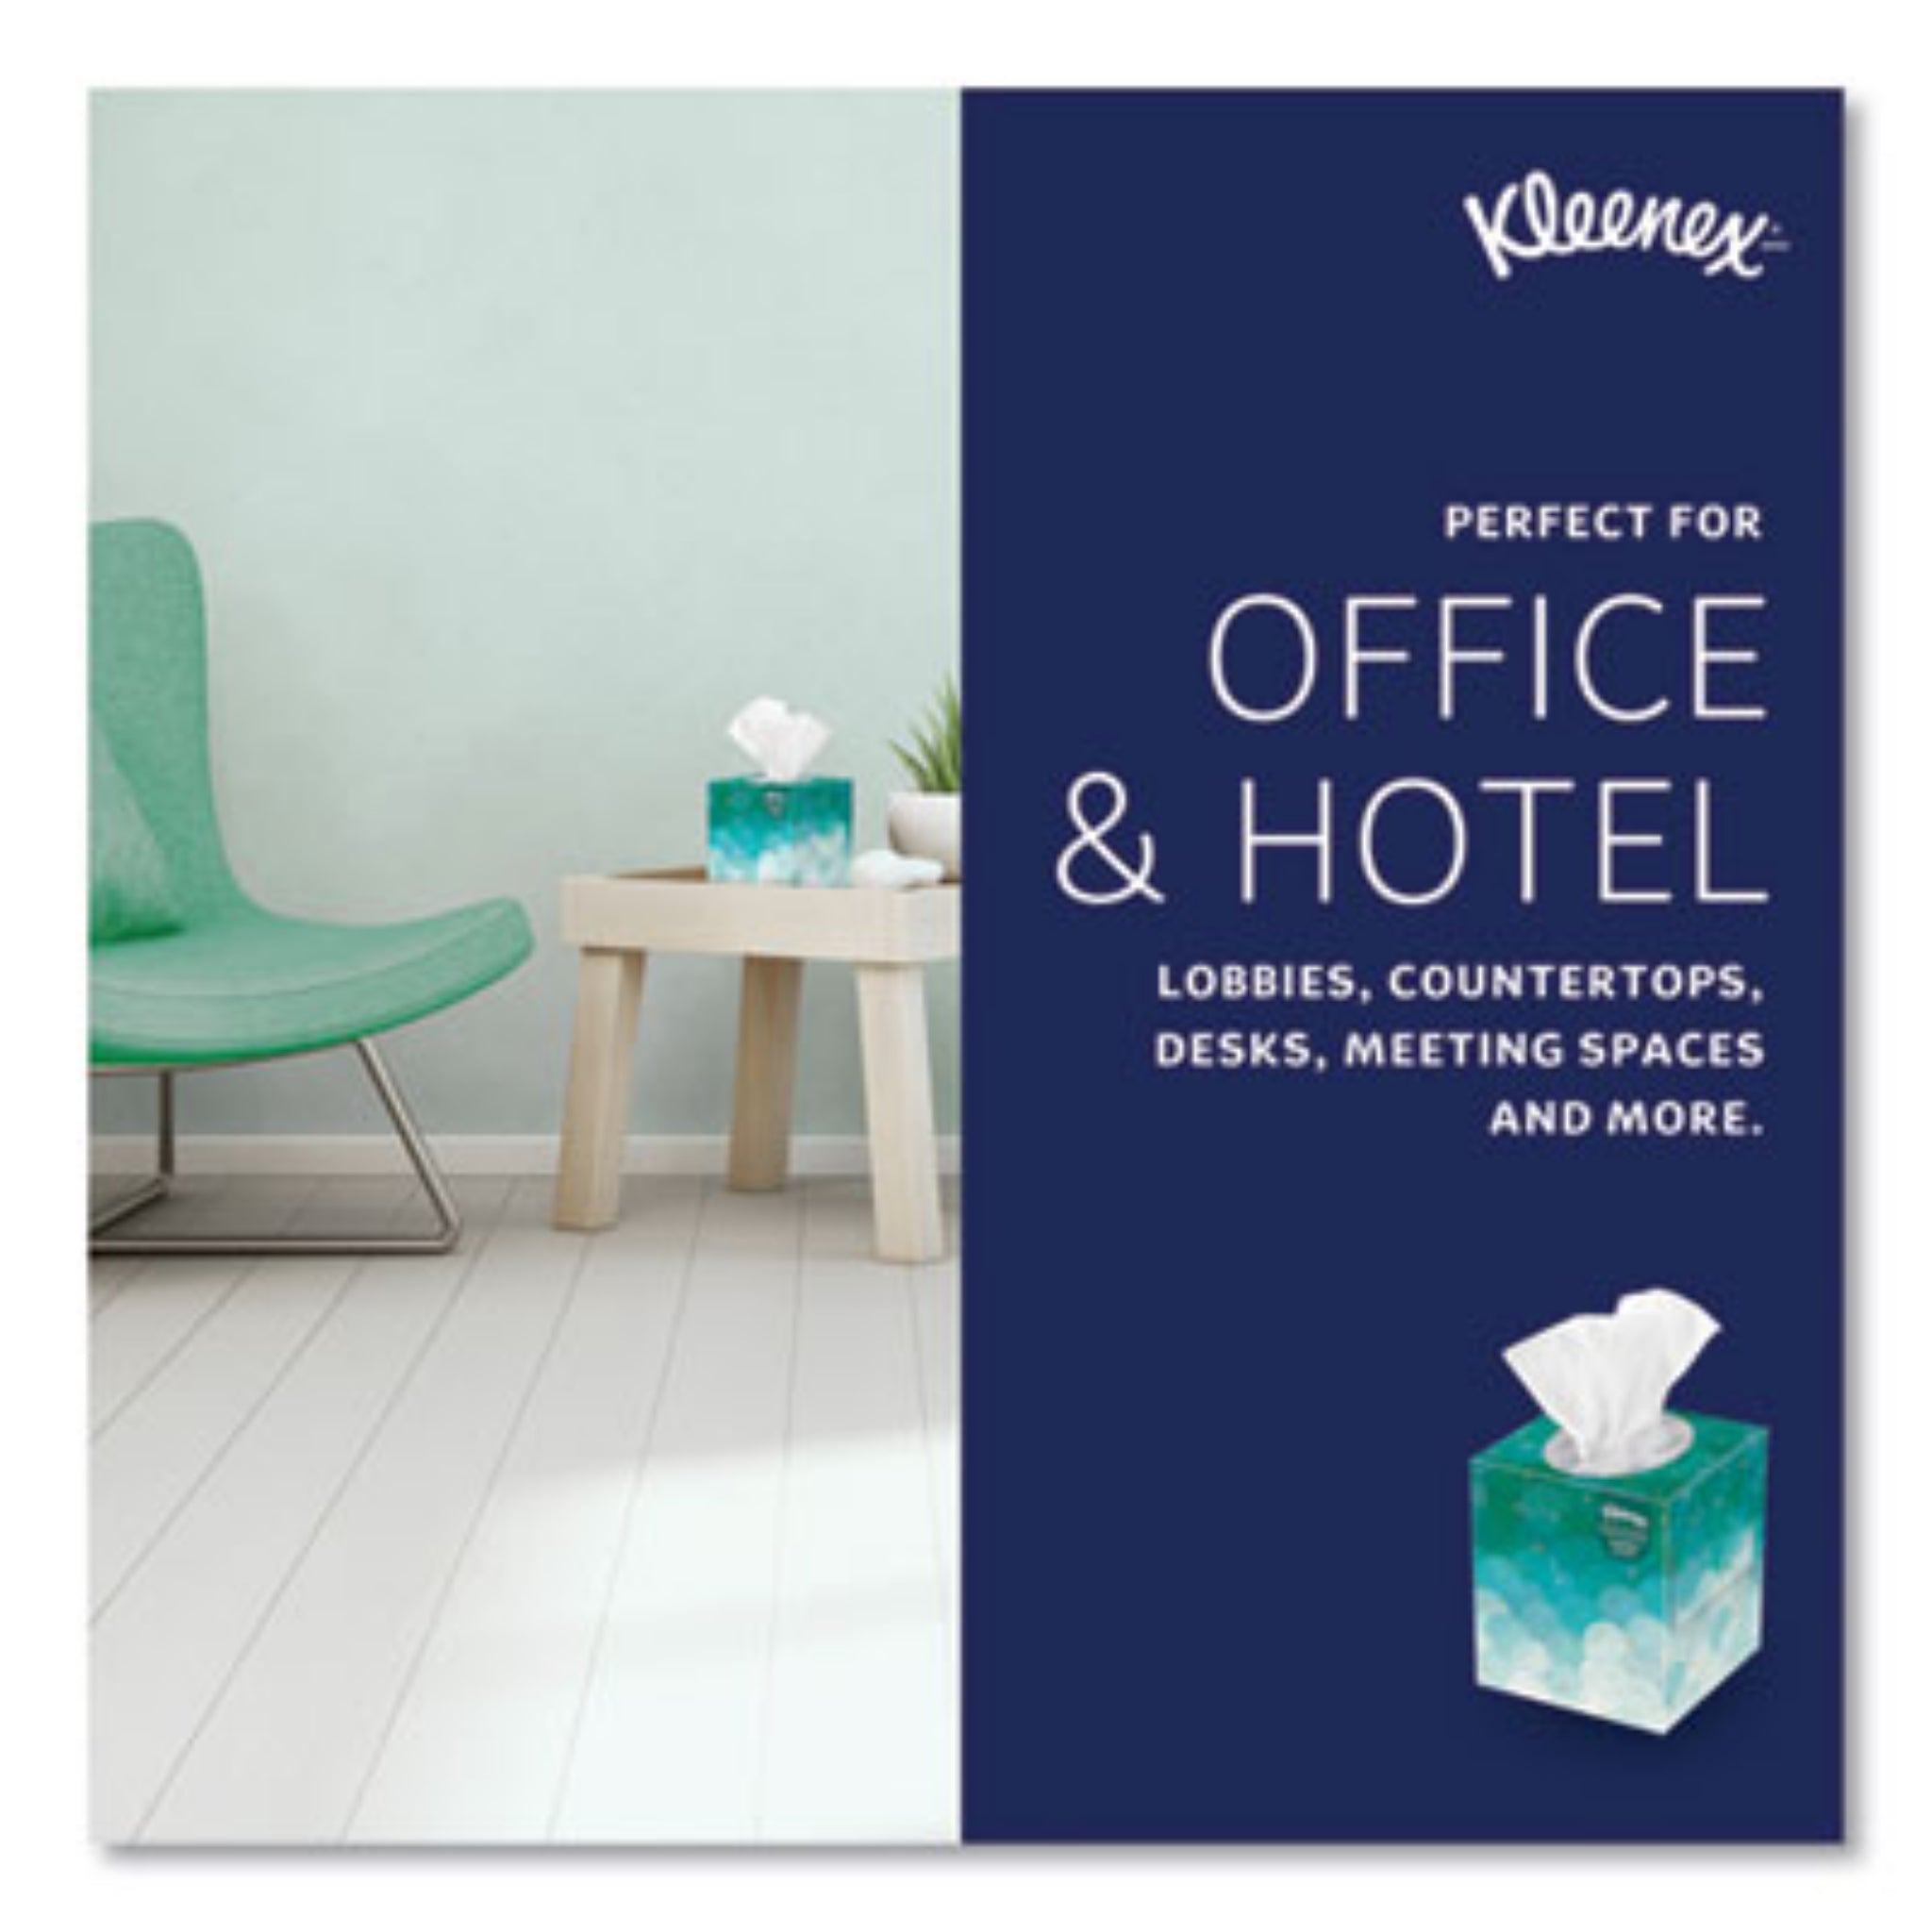 KIMBERLY-CLARK Kleenex 21270CT Boutique White Facial Tissue for Business, for Office & Hotel